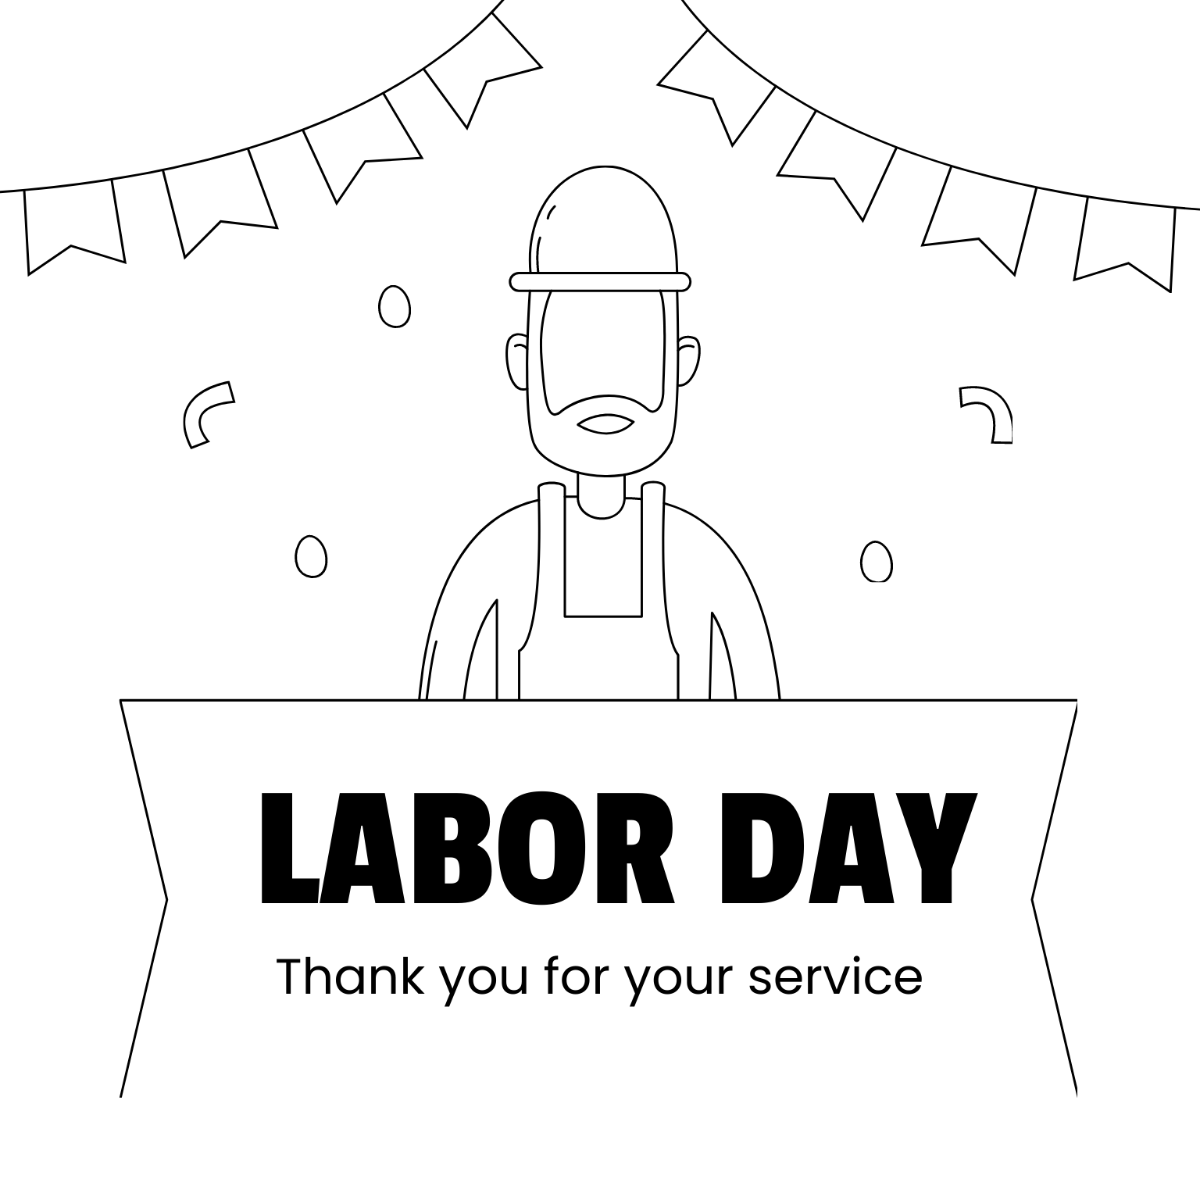 Labor Day Message Drawing